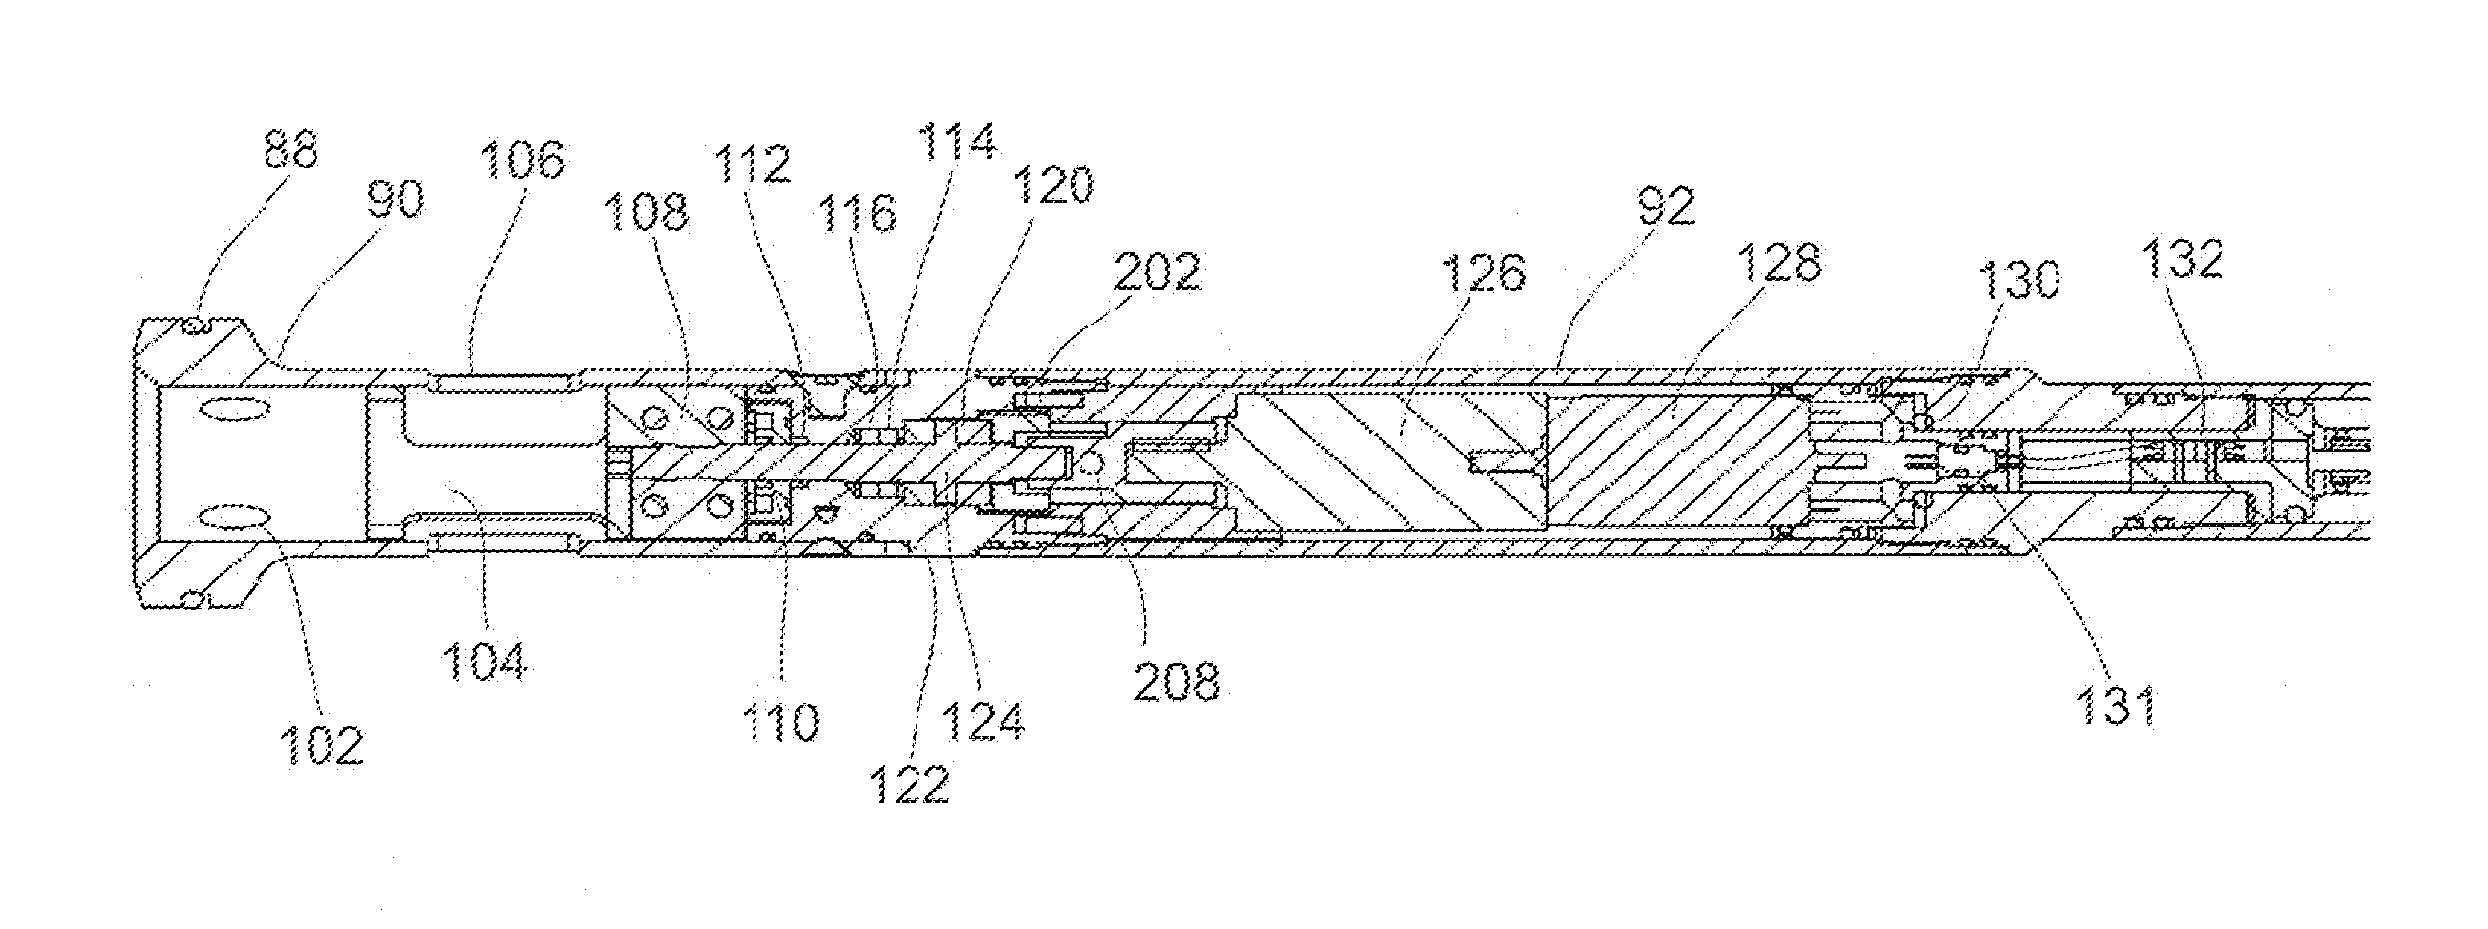 Measurement while drilling apparatus and method of using the same